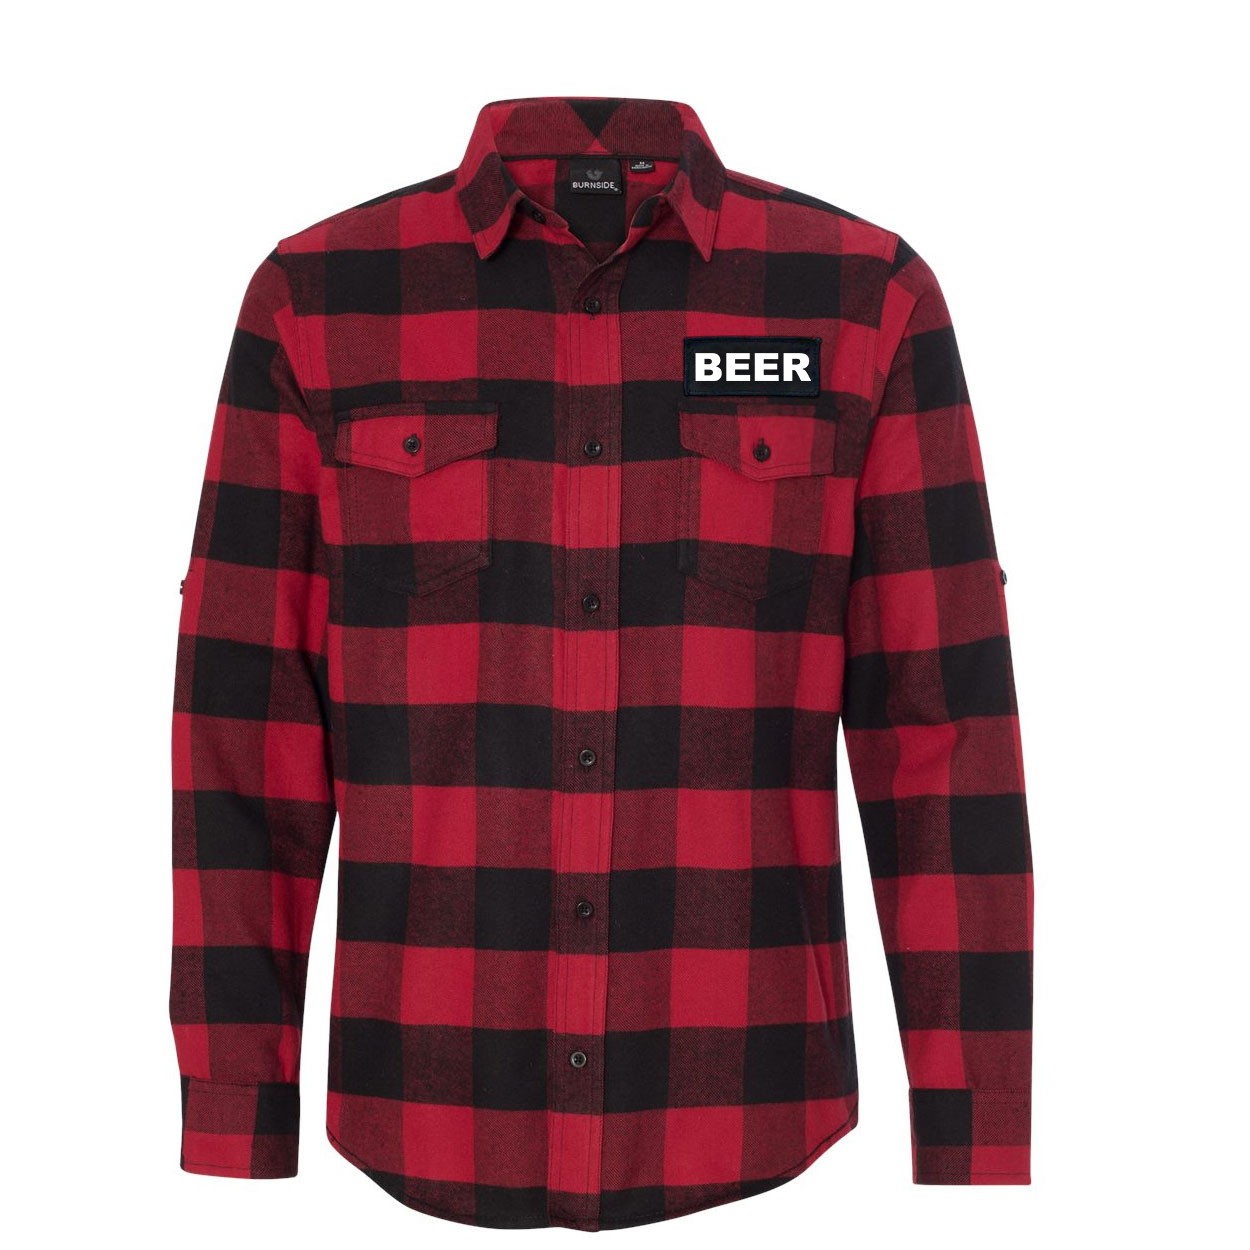 Beer Brand Logo Classic Unisex Long Sleeve Woven Patch Flannel Shirt Red/Black Buffalo (White Logo)